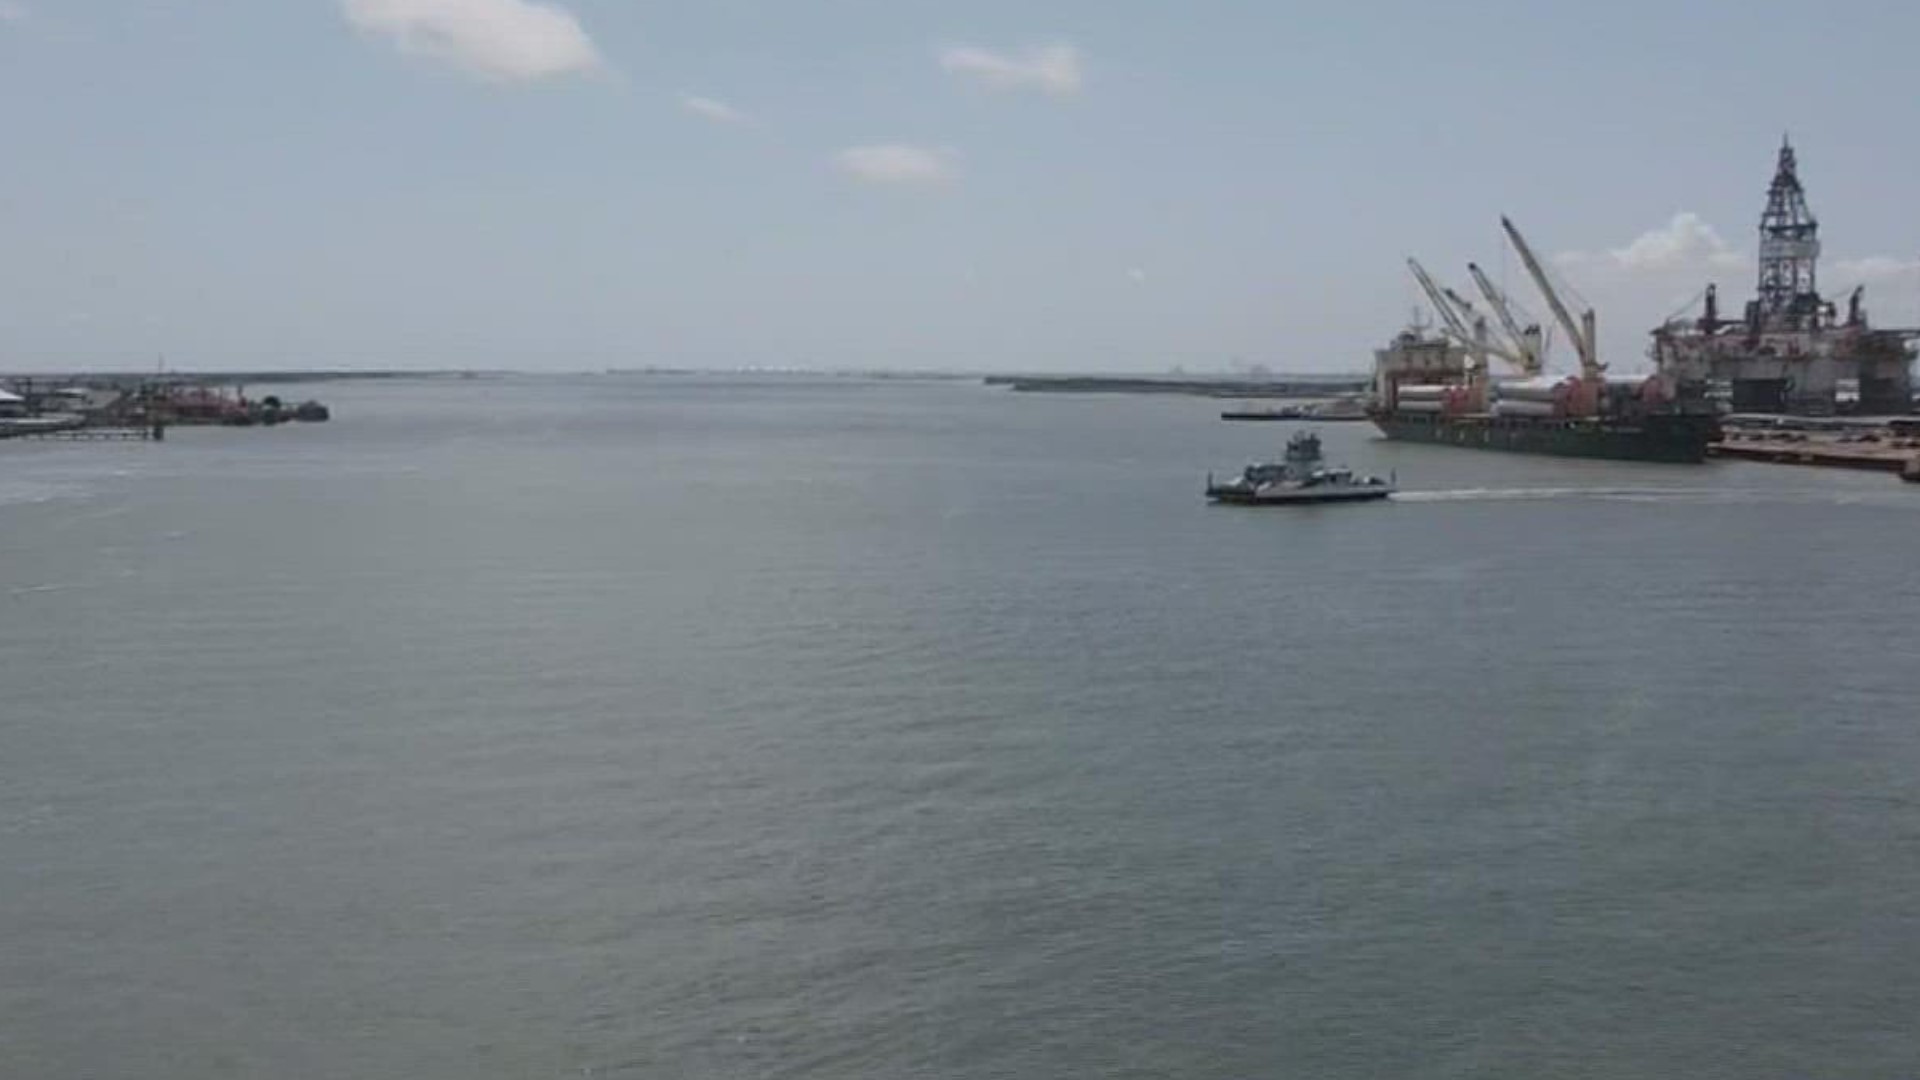 Sean Strawbridge, CEO of the Port of Corpus Christi, said the move will "ensure an ecologically healthy and prosperous future for the region."